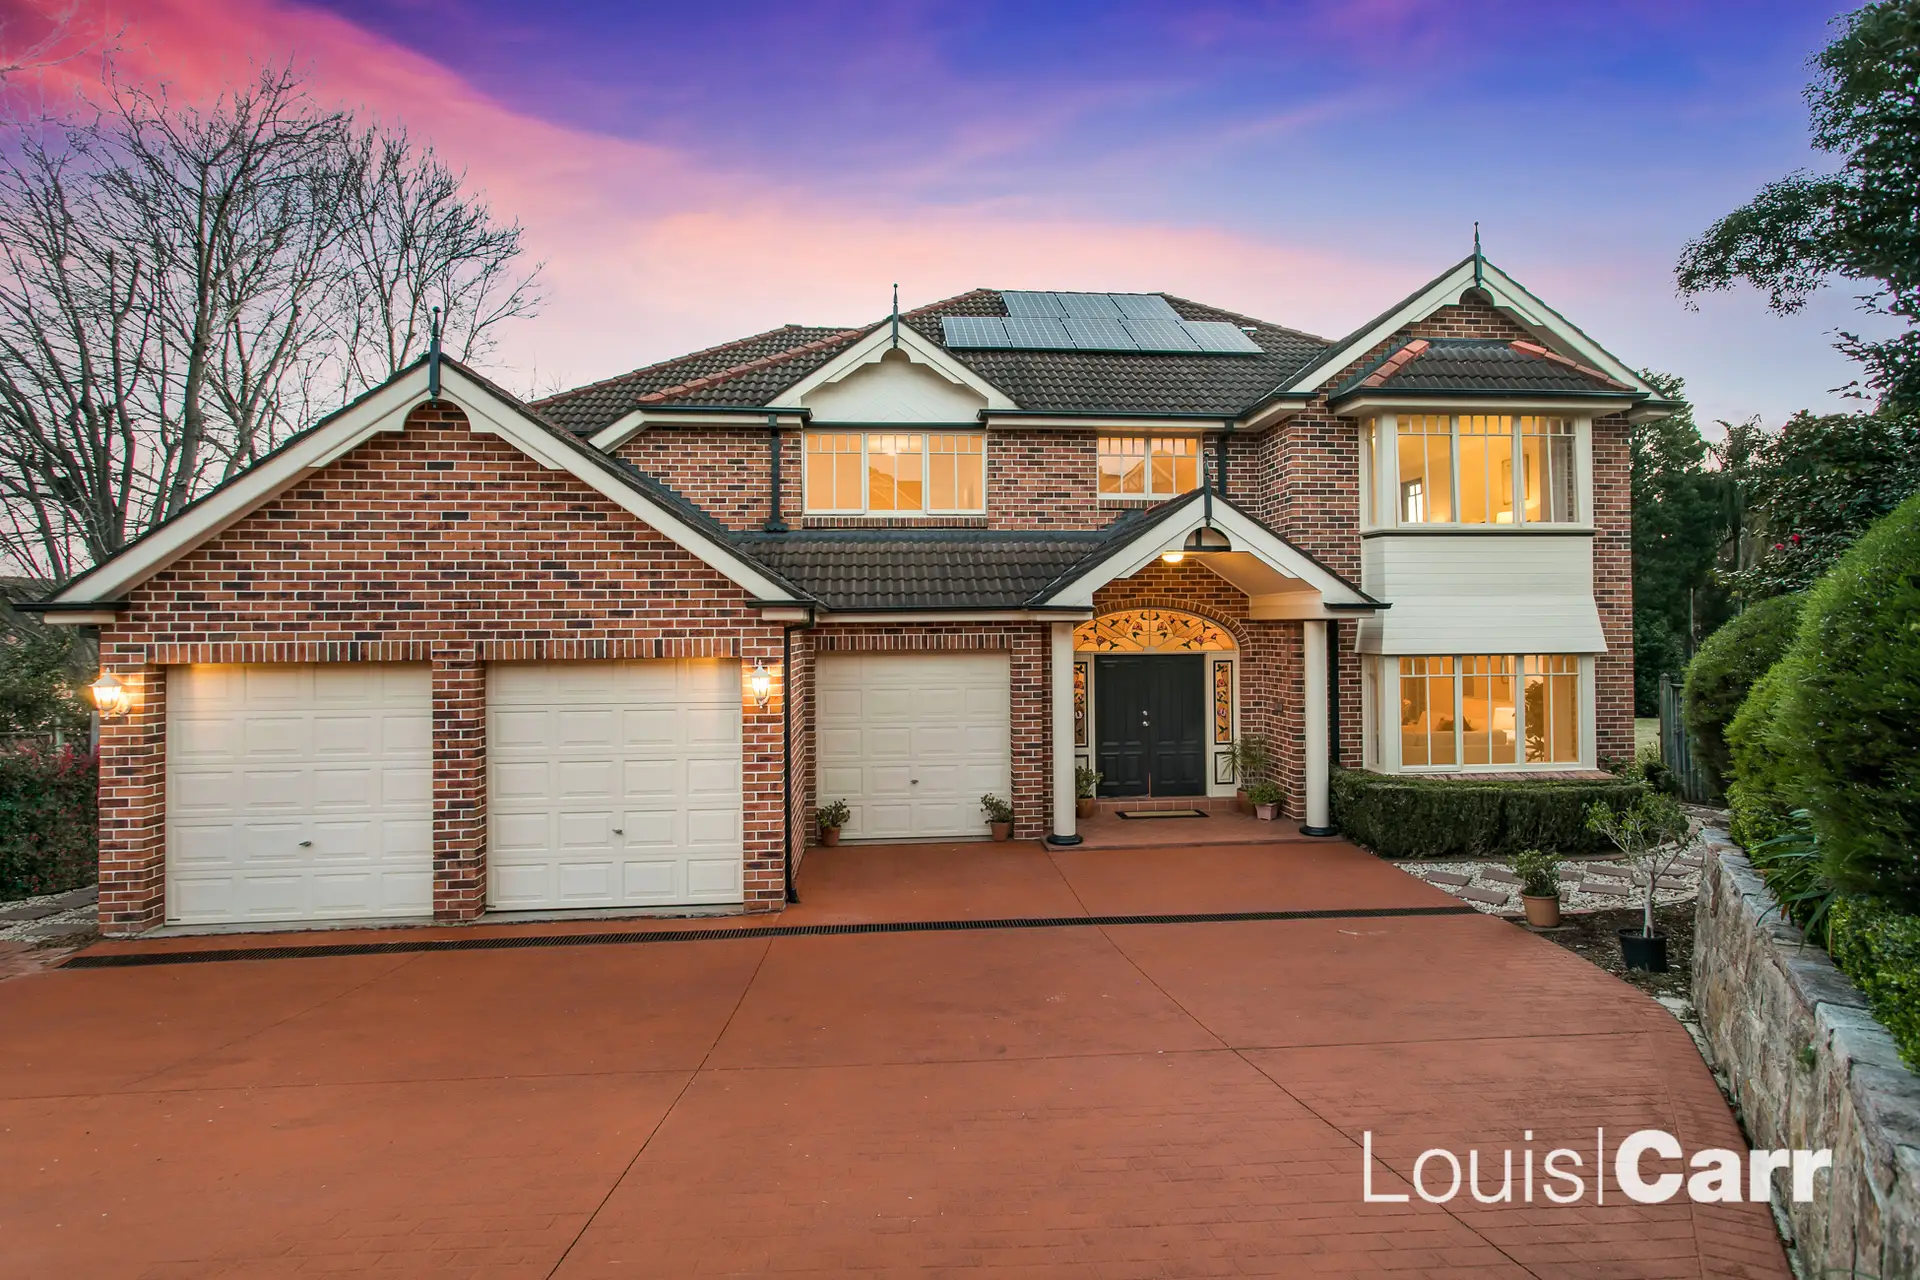 Photo #1: 4 Woodleaf Close, West Pennant Hills - Sold by Louis Carr Real Estate